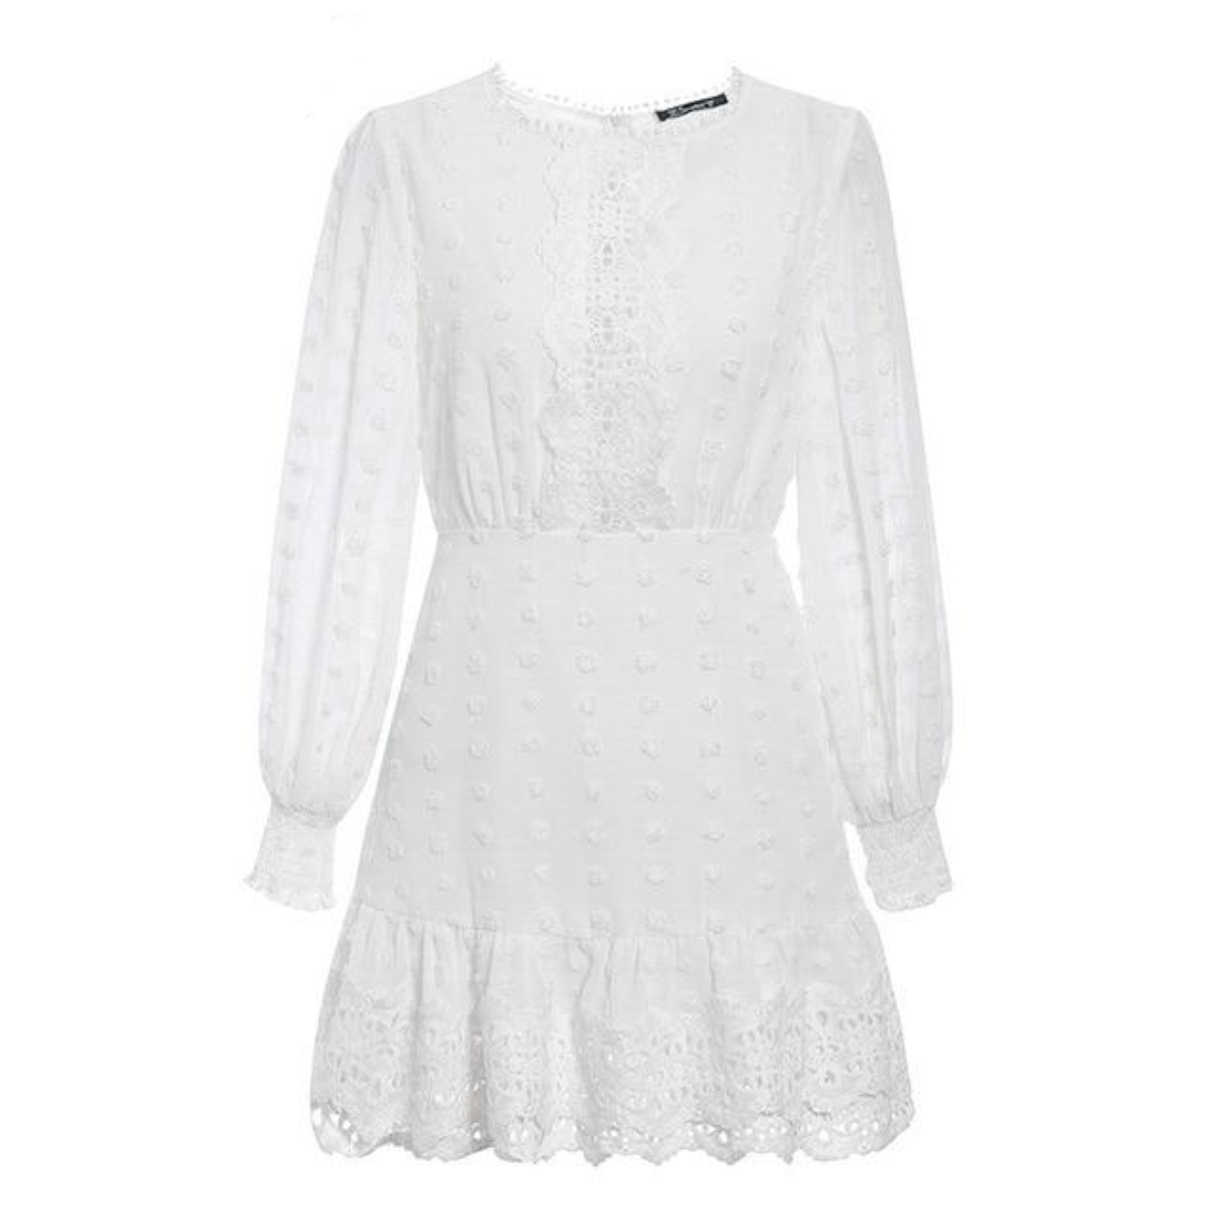 Elegant Long Sleeve Lace Dress with Embroidery Dots